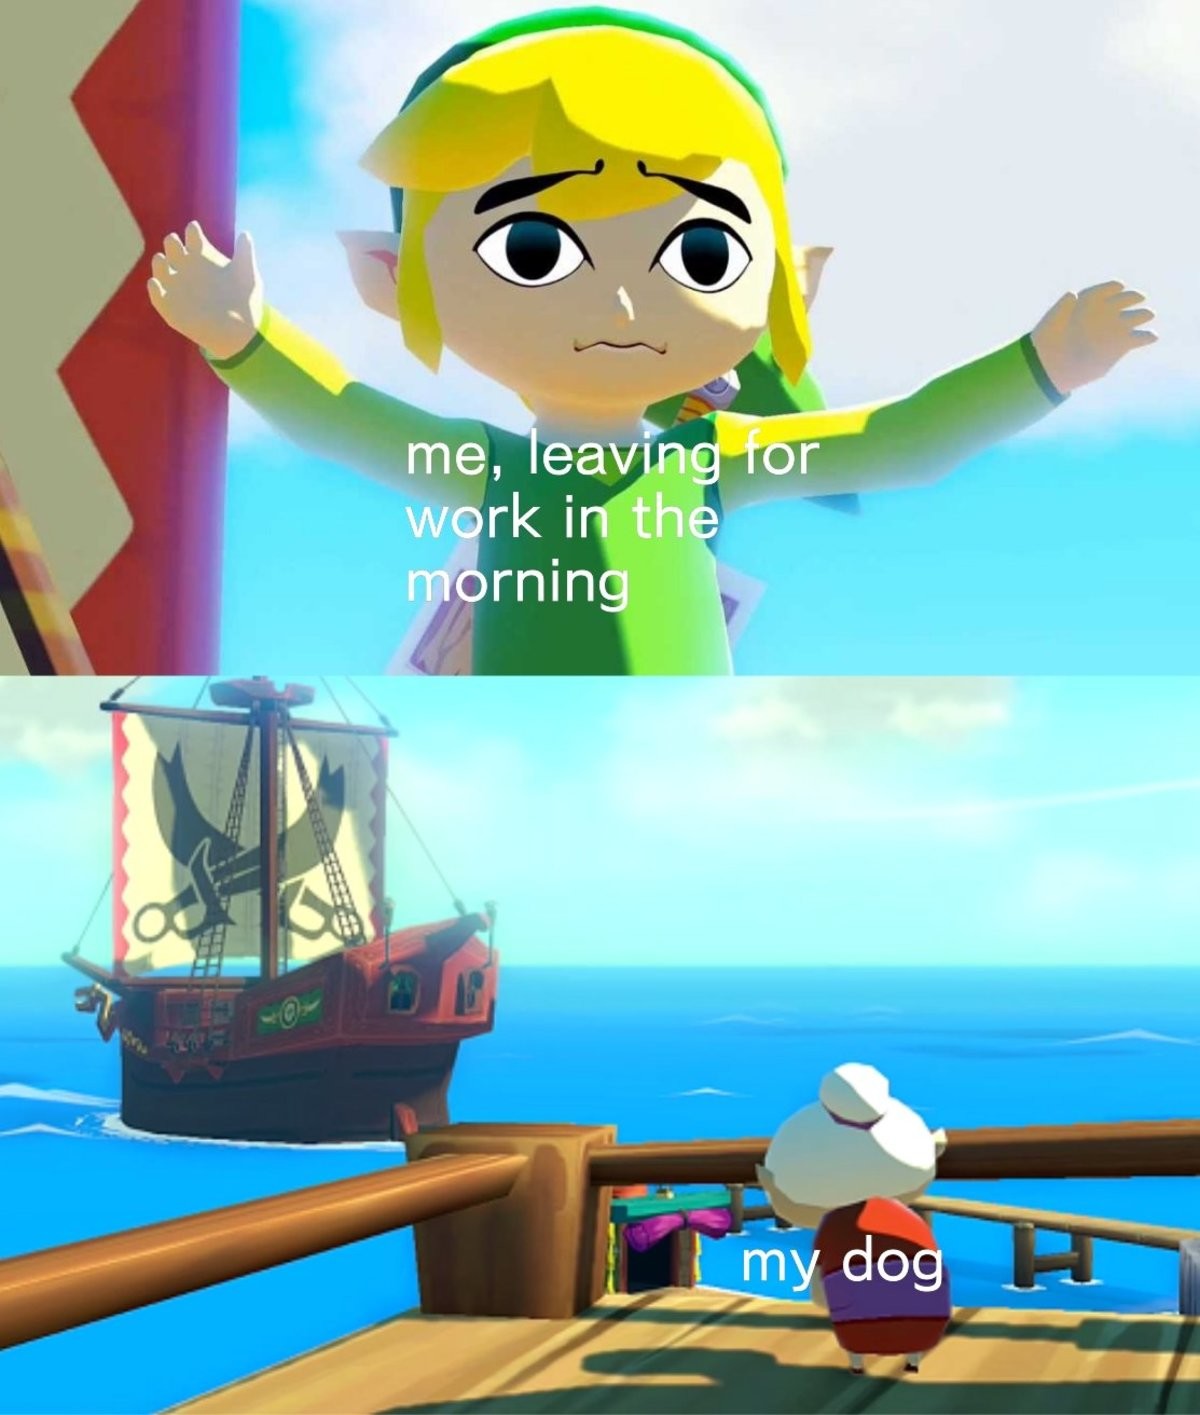 He misses me. .. Wind waker is such a pretty game And links grandma was adorable